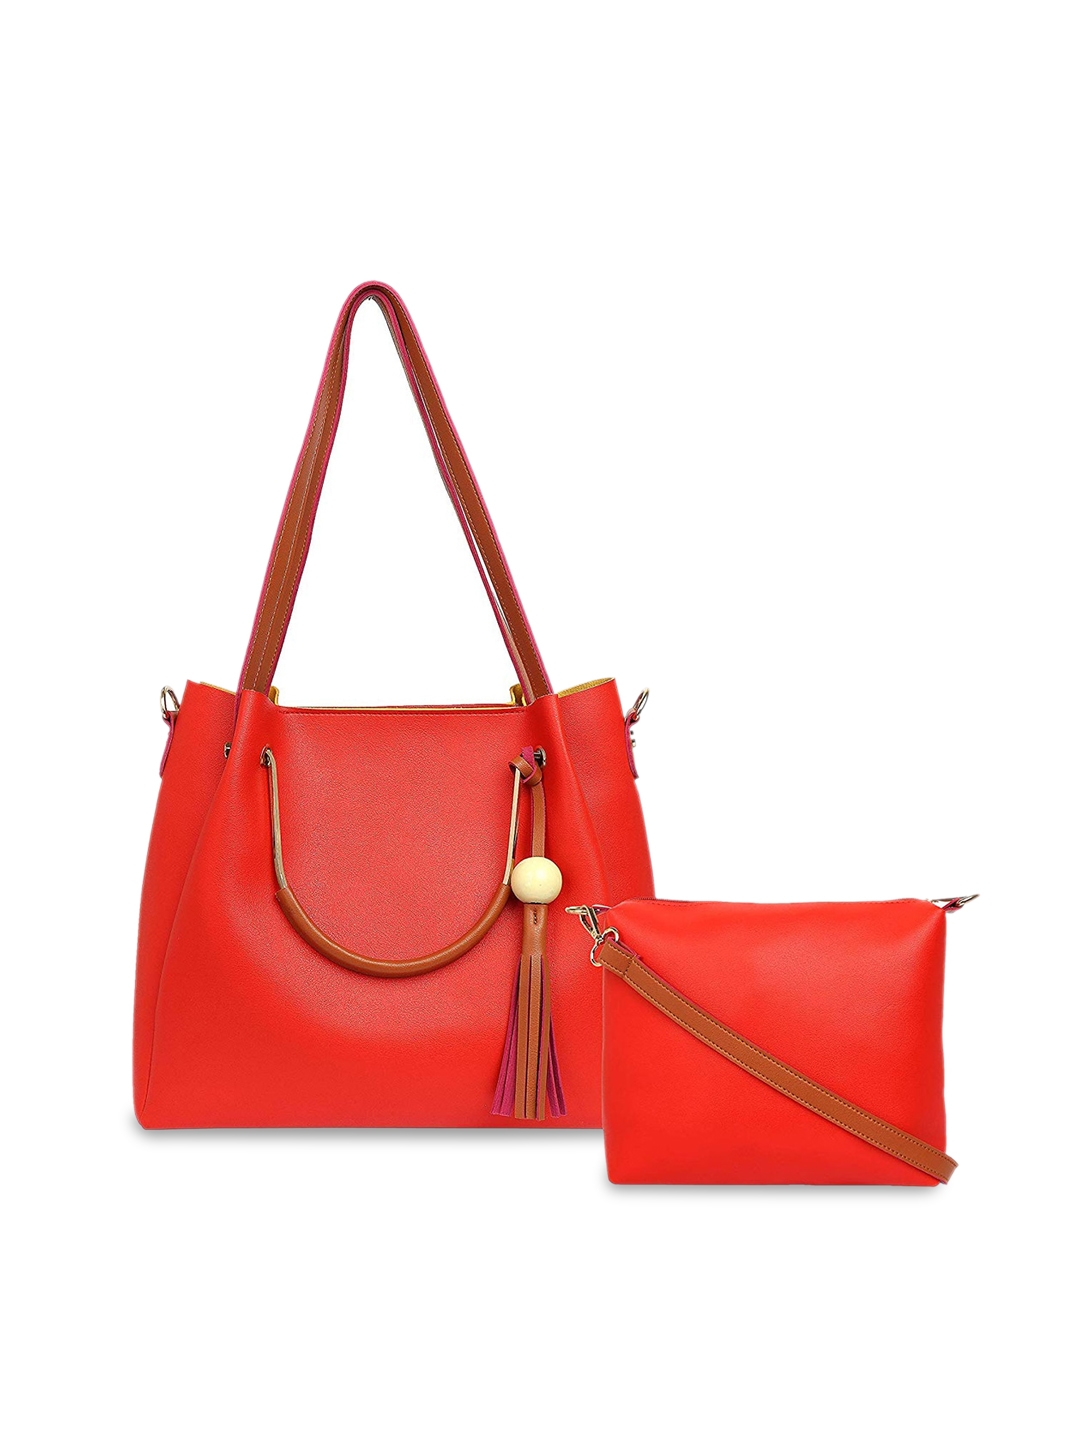 Lychee bags Red Solid PU Shoulder Bag with Sling Bag